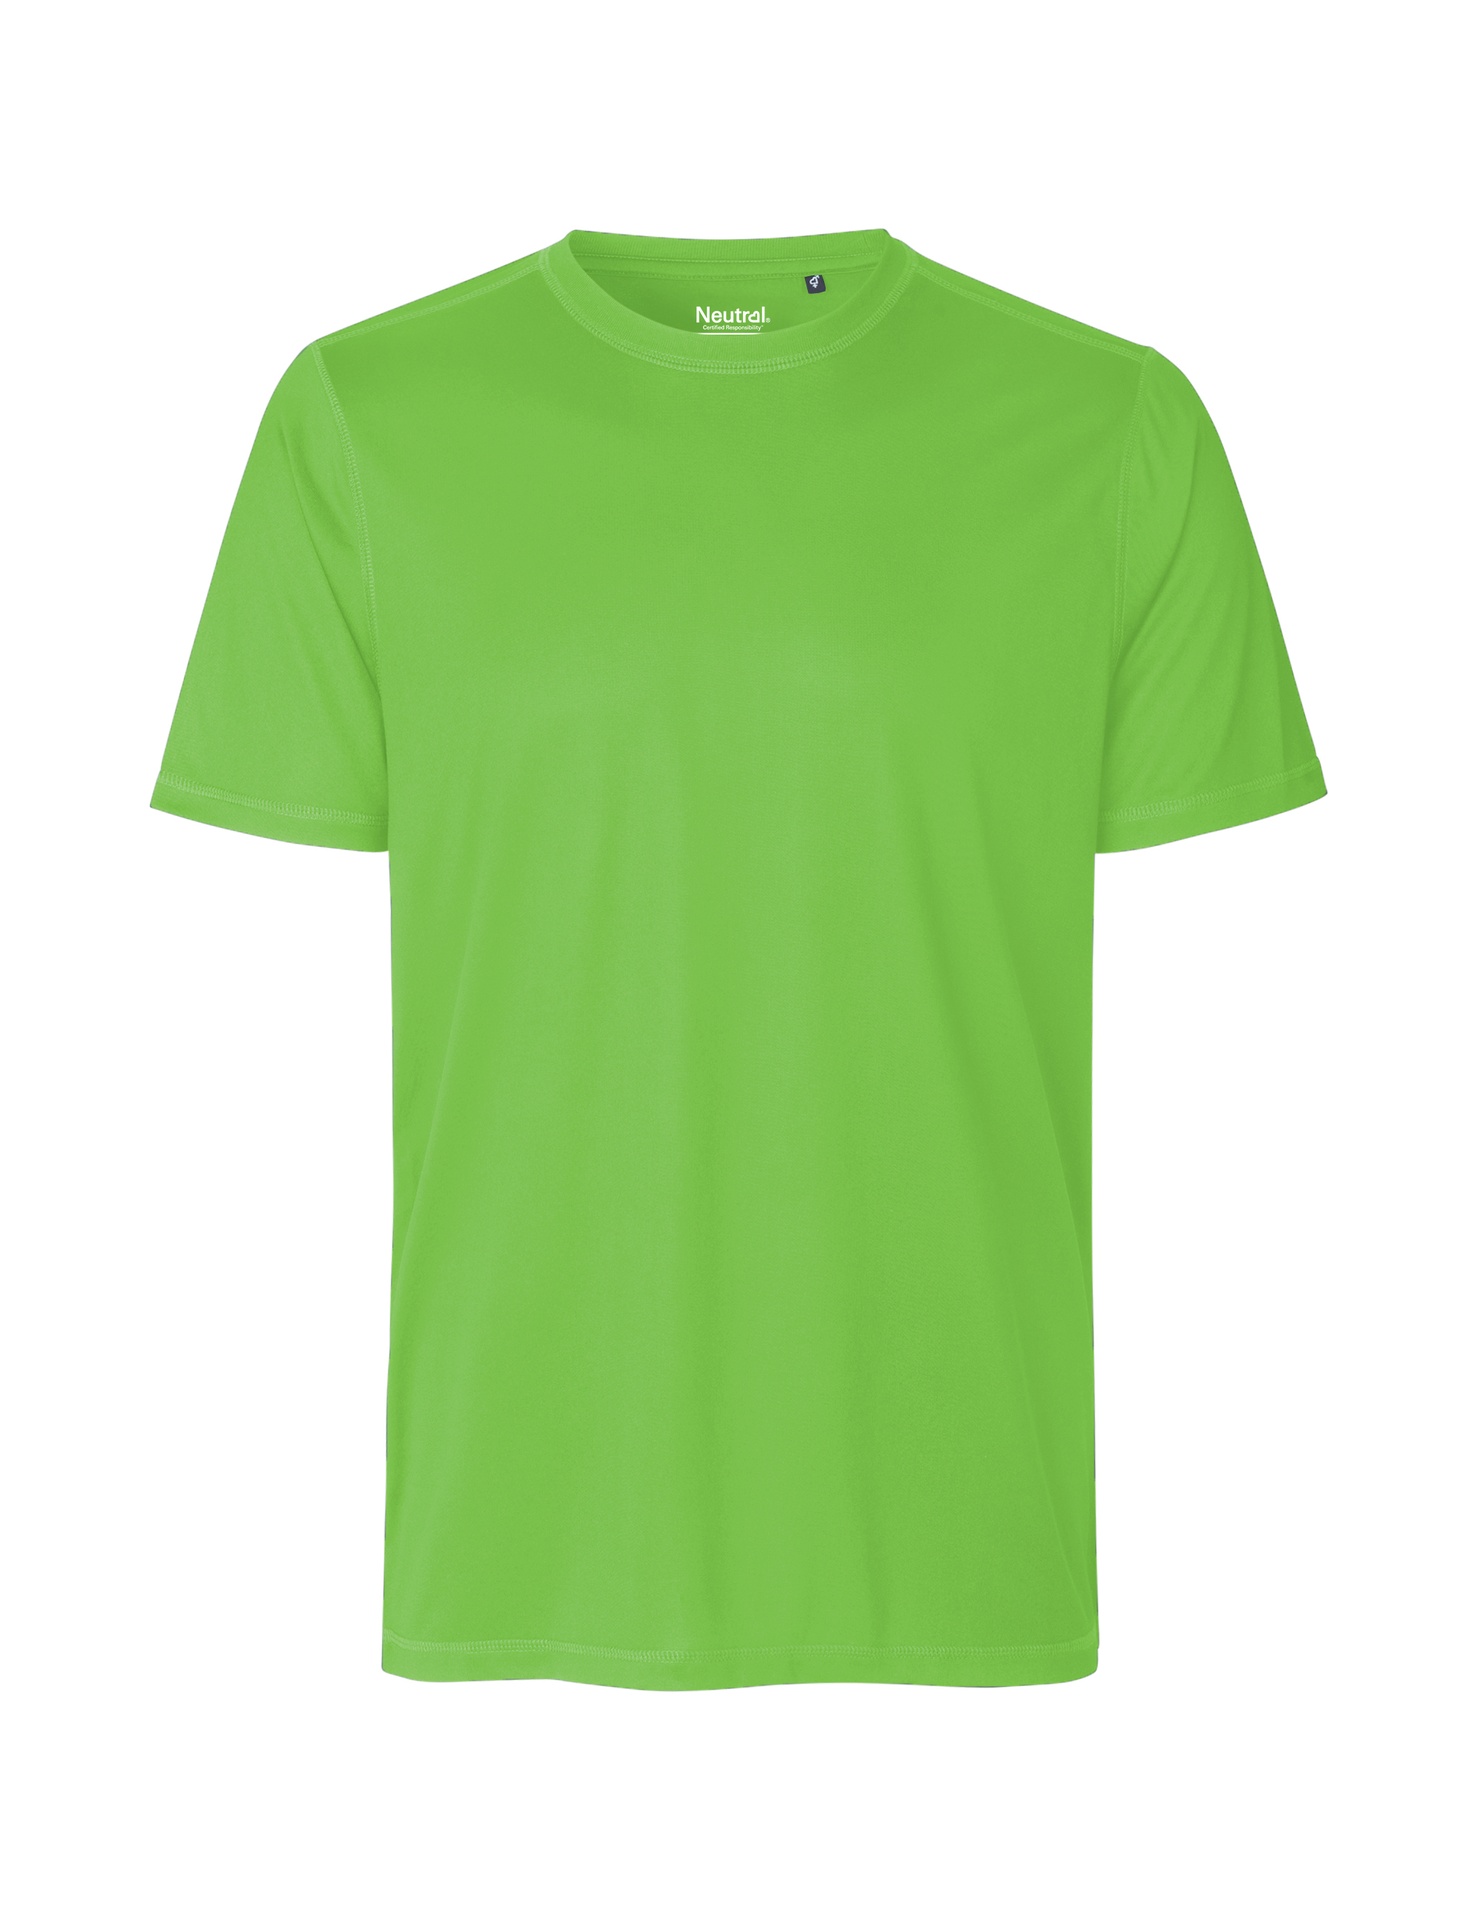 [PR/03779] Recycled Performance T-Shirt (Lime 12, M)